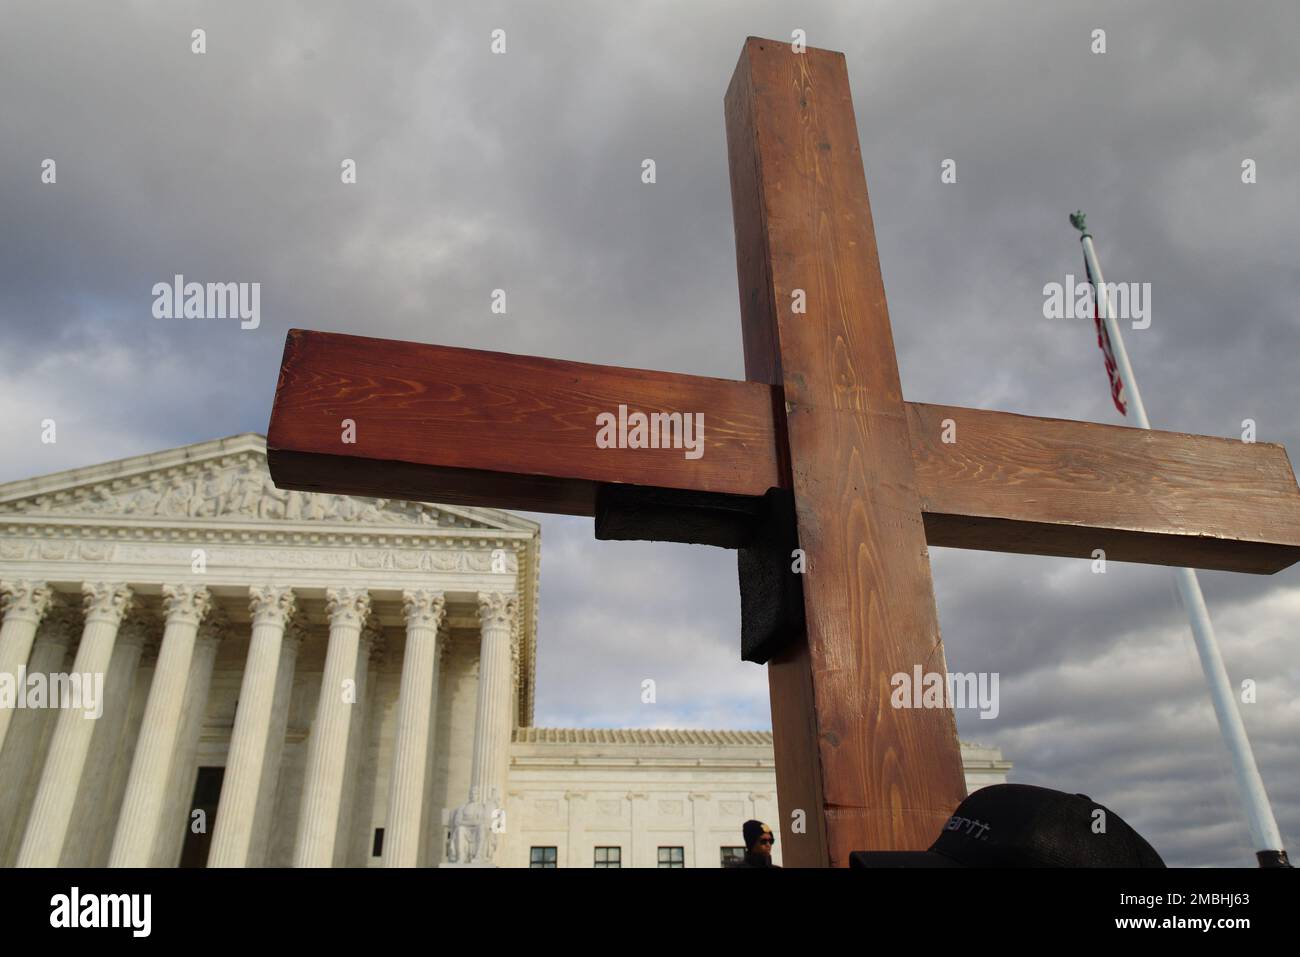 Washington DC, USA. 20 Jan 2023. Pro-life protesters carry a large wooden cross to the U.S. Supreme Court during the March for Life antiabortion demonstration, the first since the overturn of Roe v. Wade. Credit: Philip Yabut/Alamy Live News Stock Photo